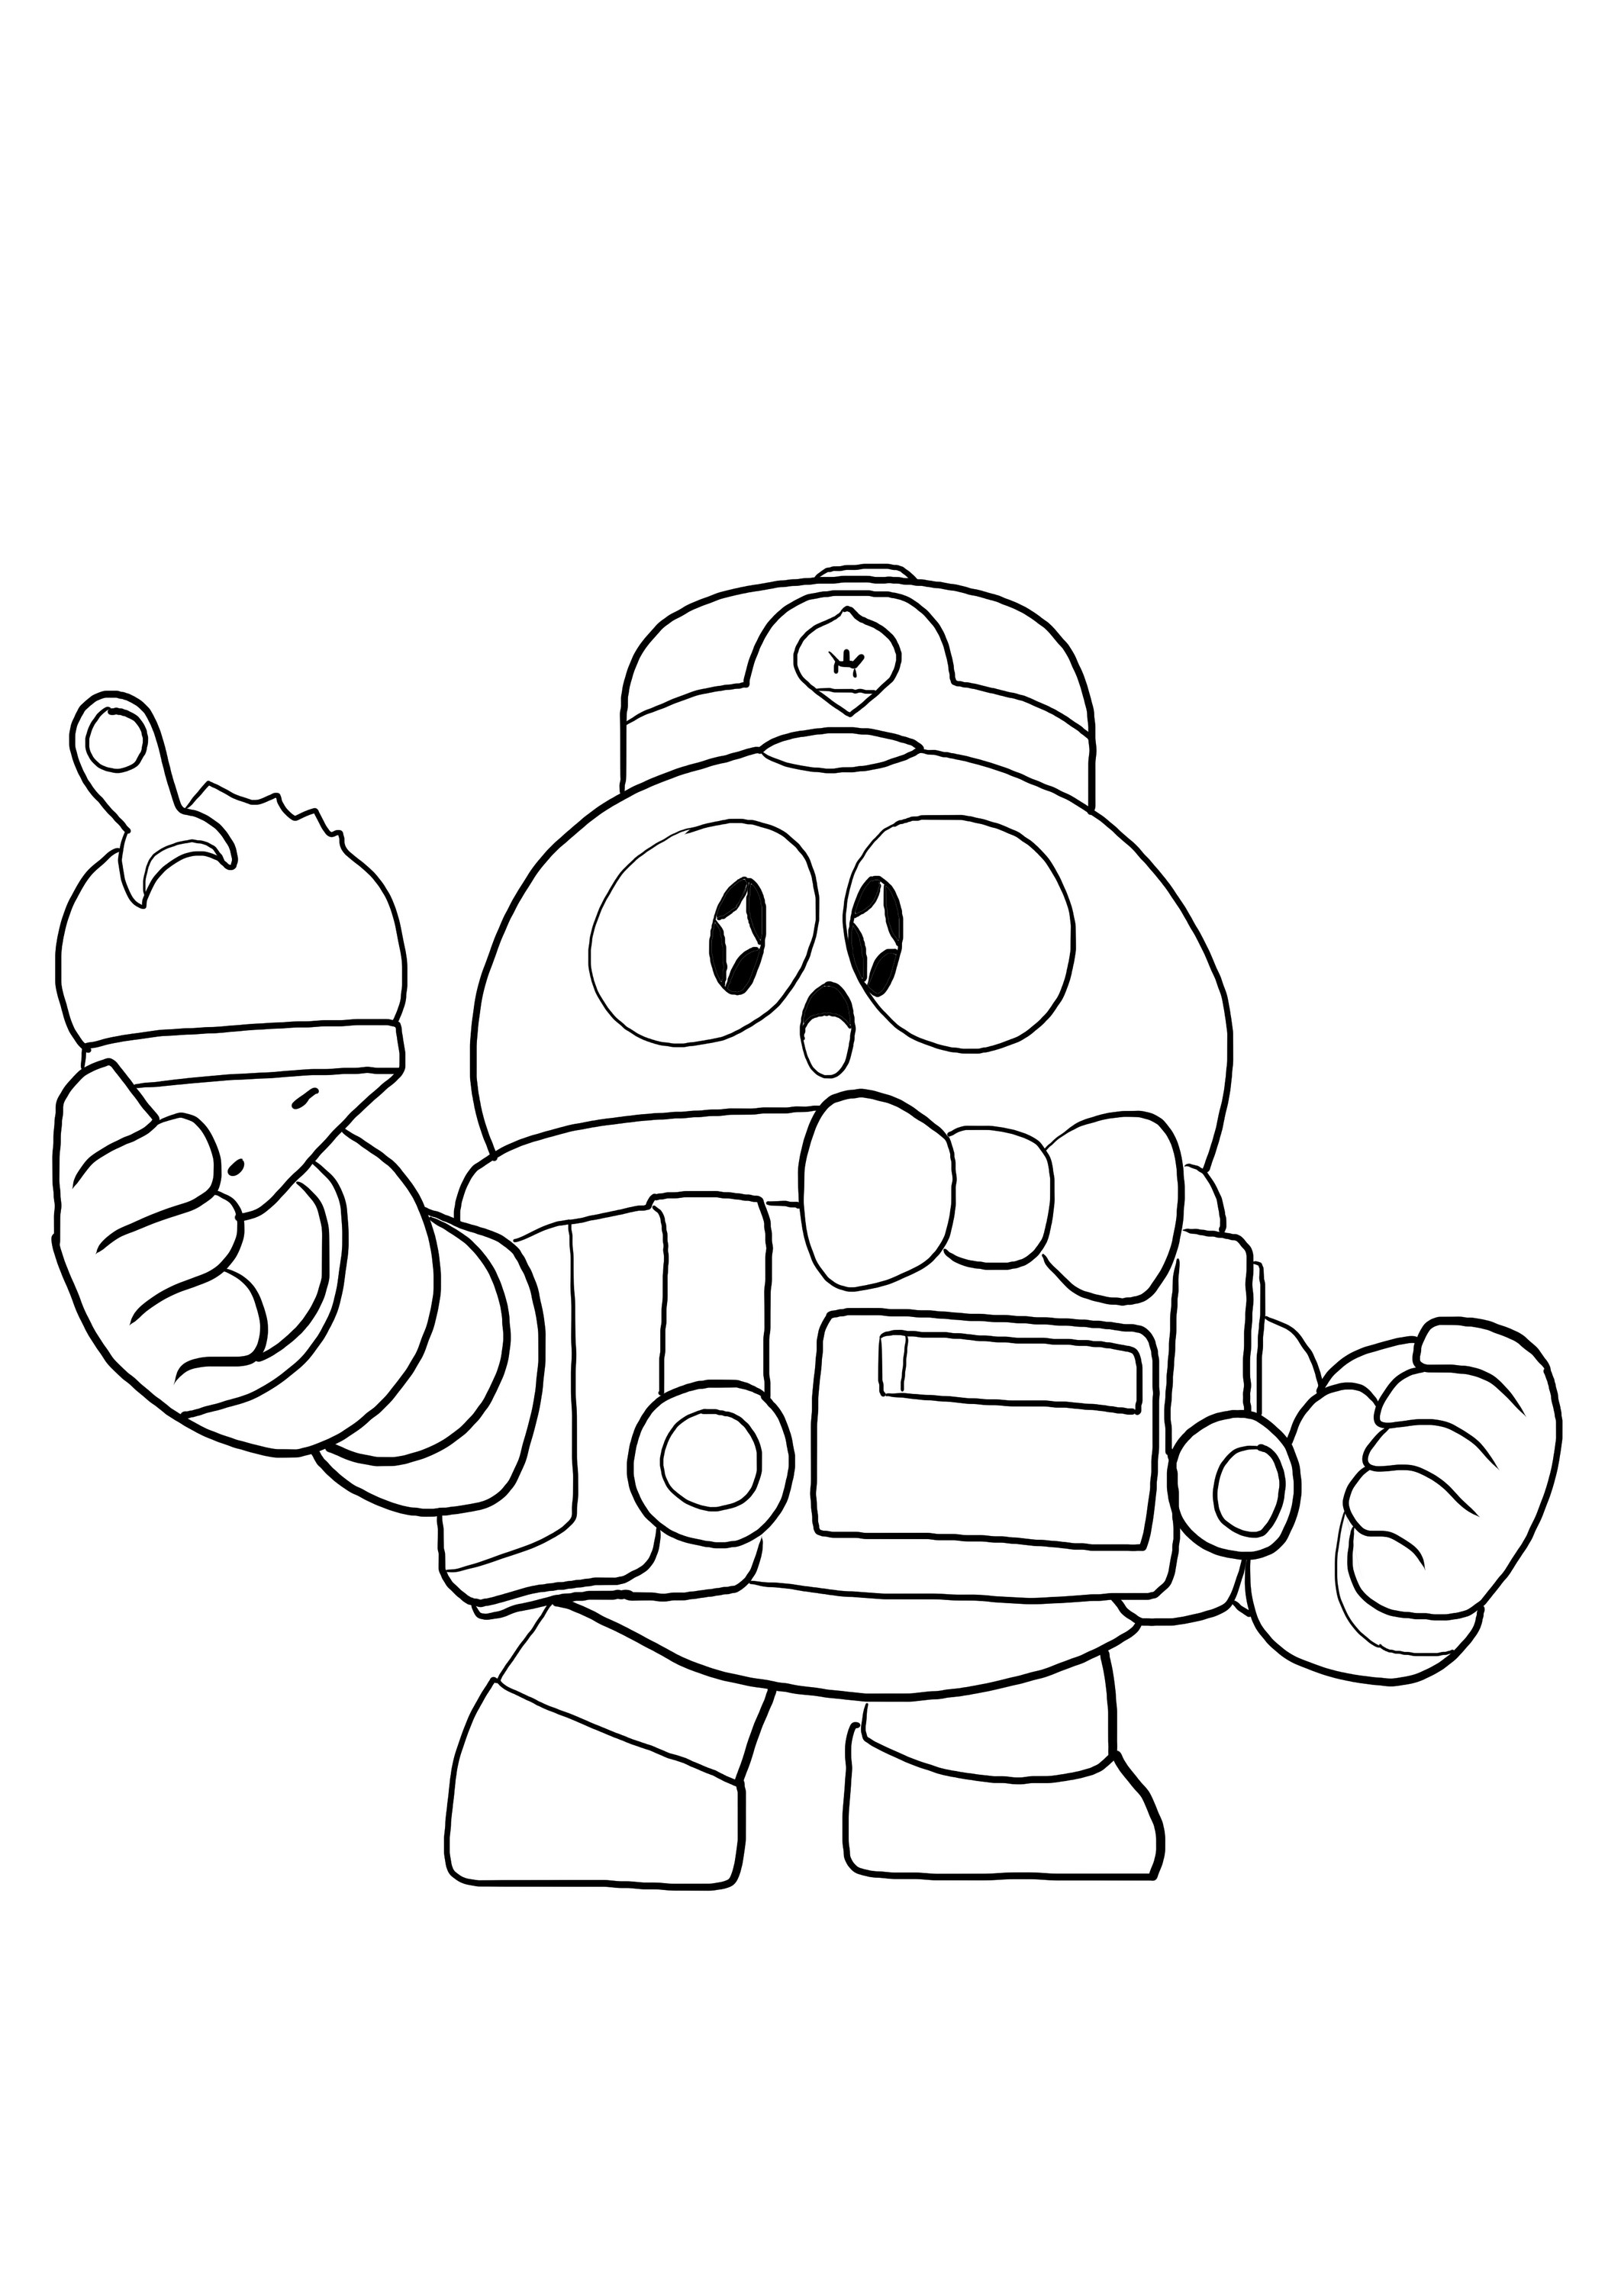 Lou from Brawl Stars coloring page to print and coloring